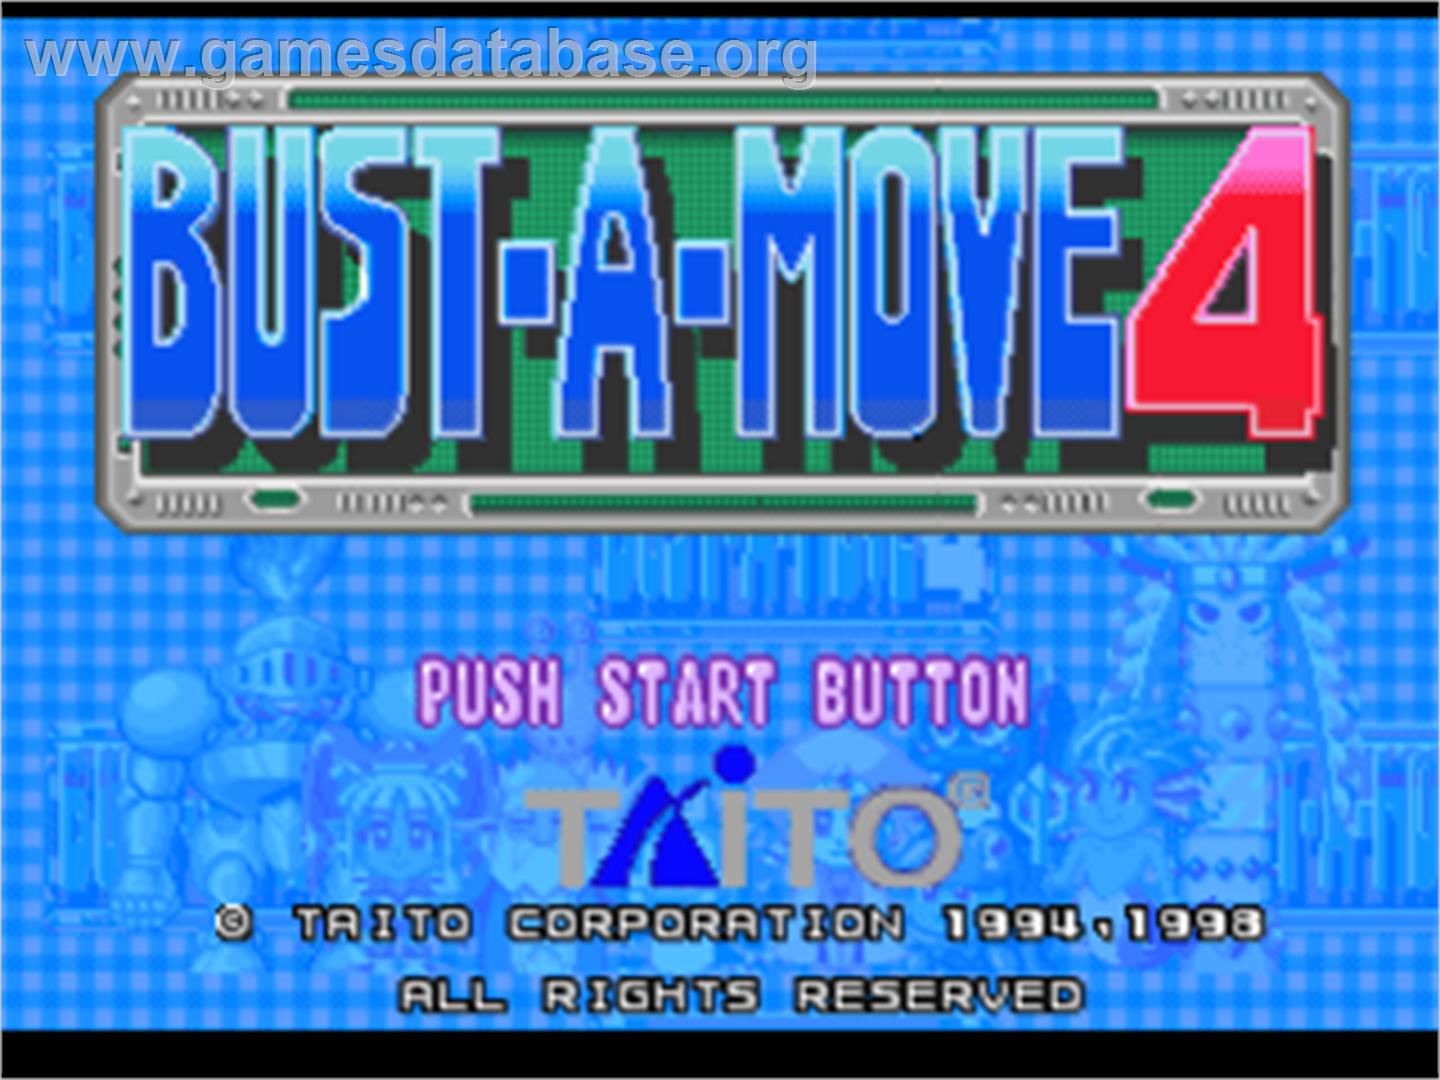 Bust-A-Move 4 - Sony Playstation - Artwork - Title Screen